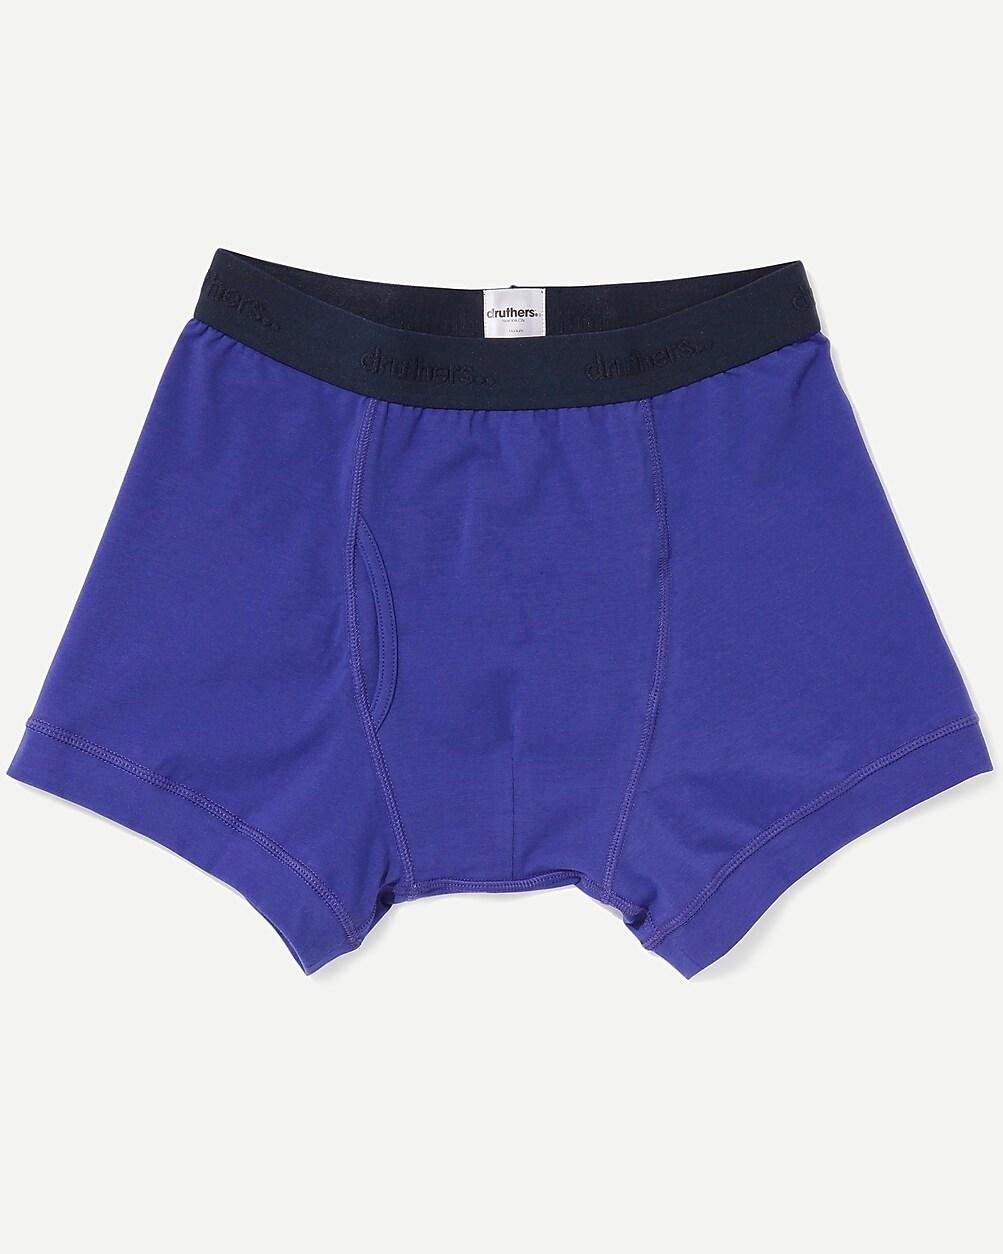 Druthers™ stretch organic cotton-blend boxer briefs by J.CREW